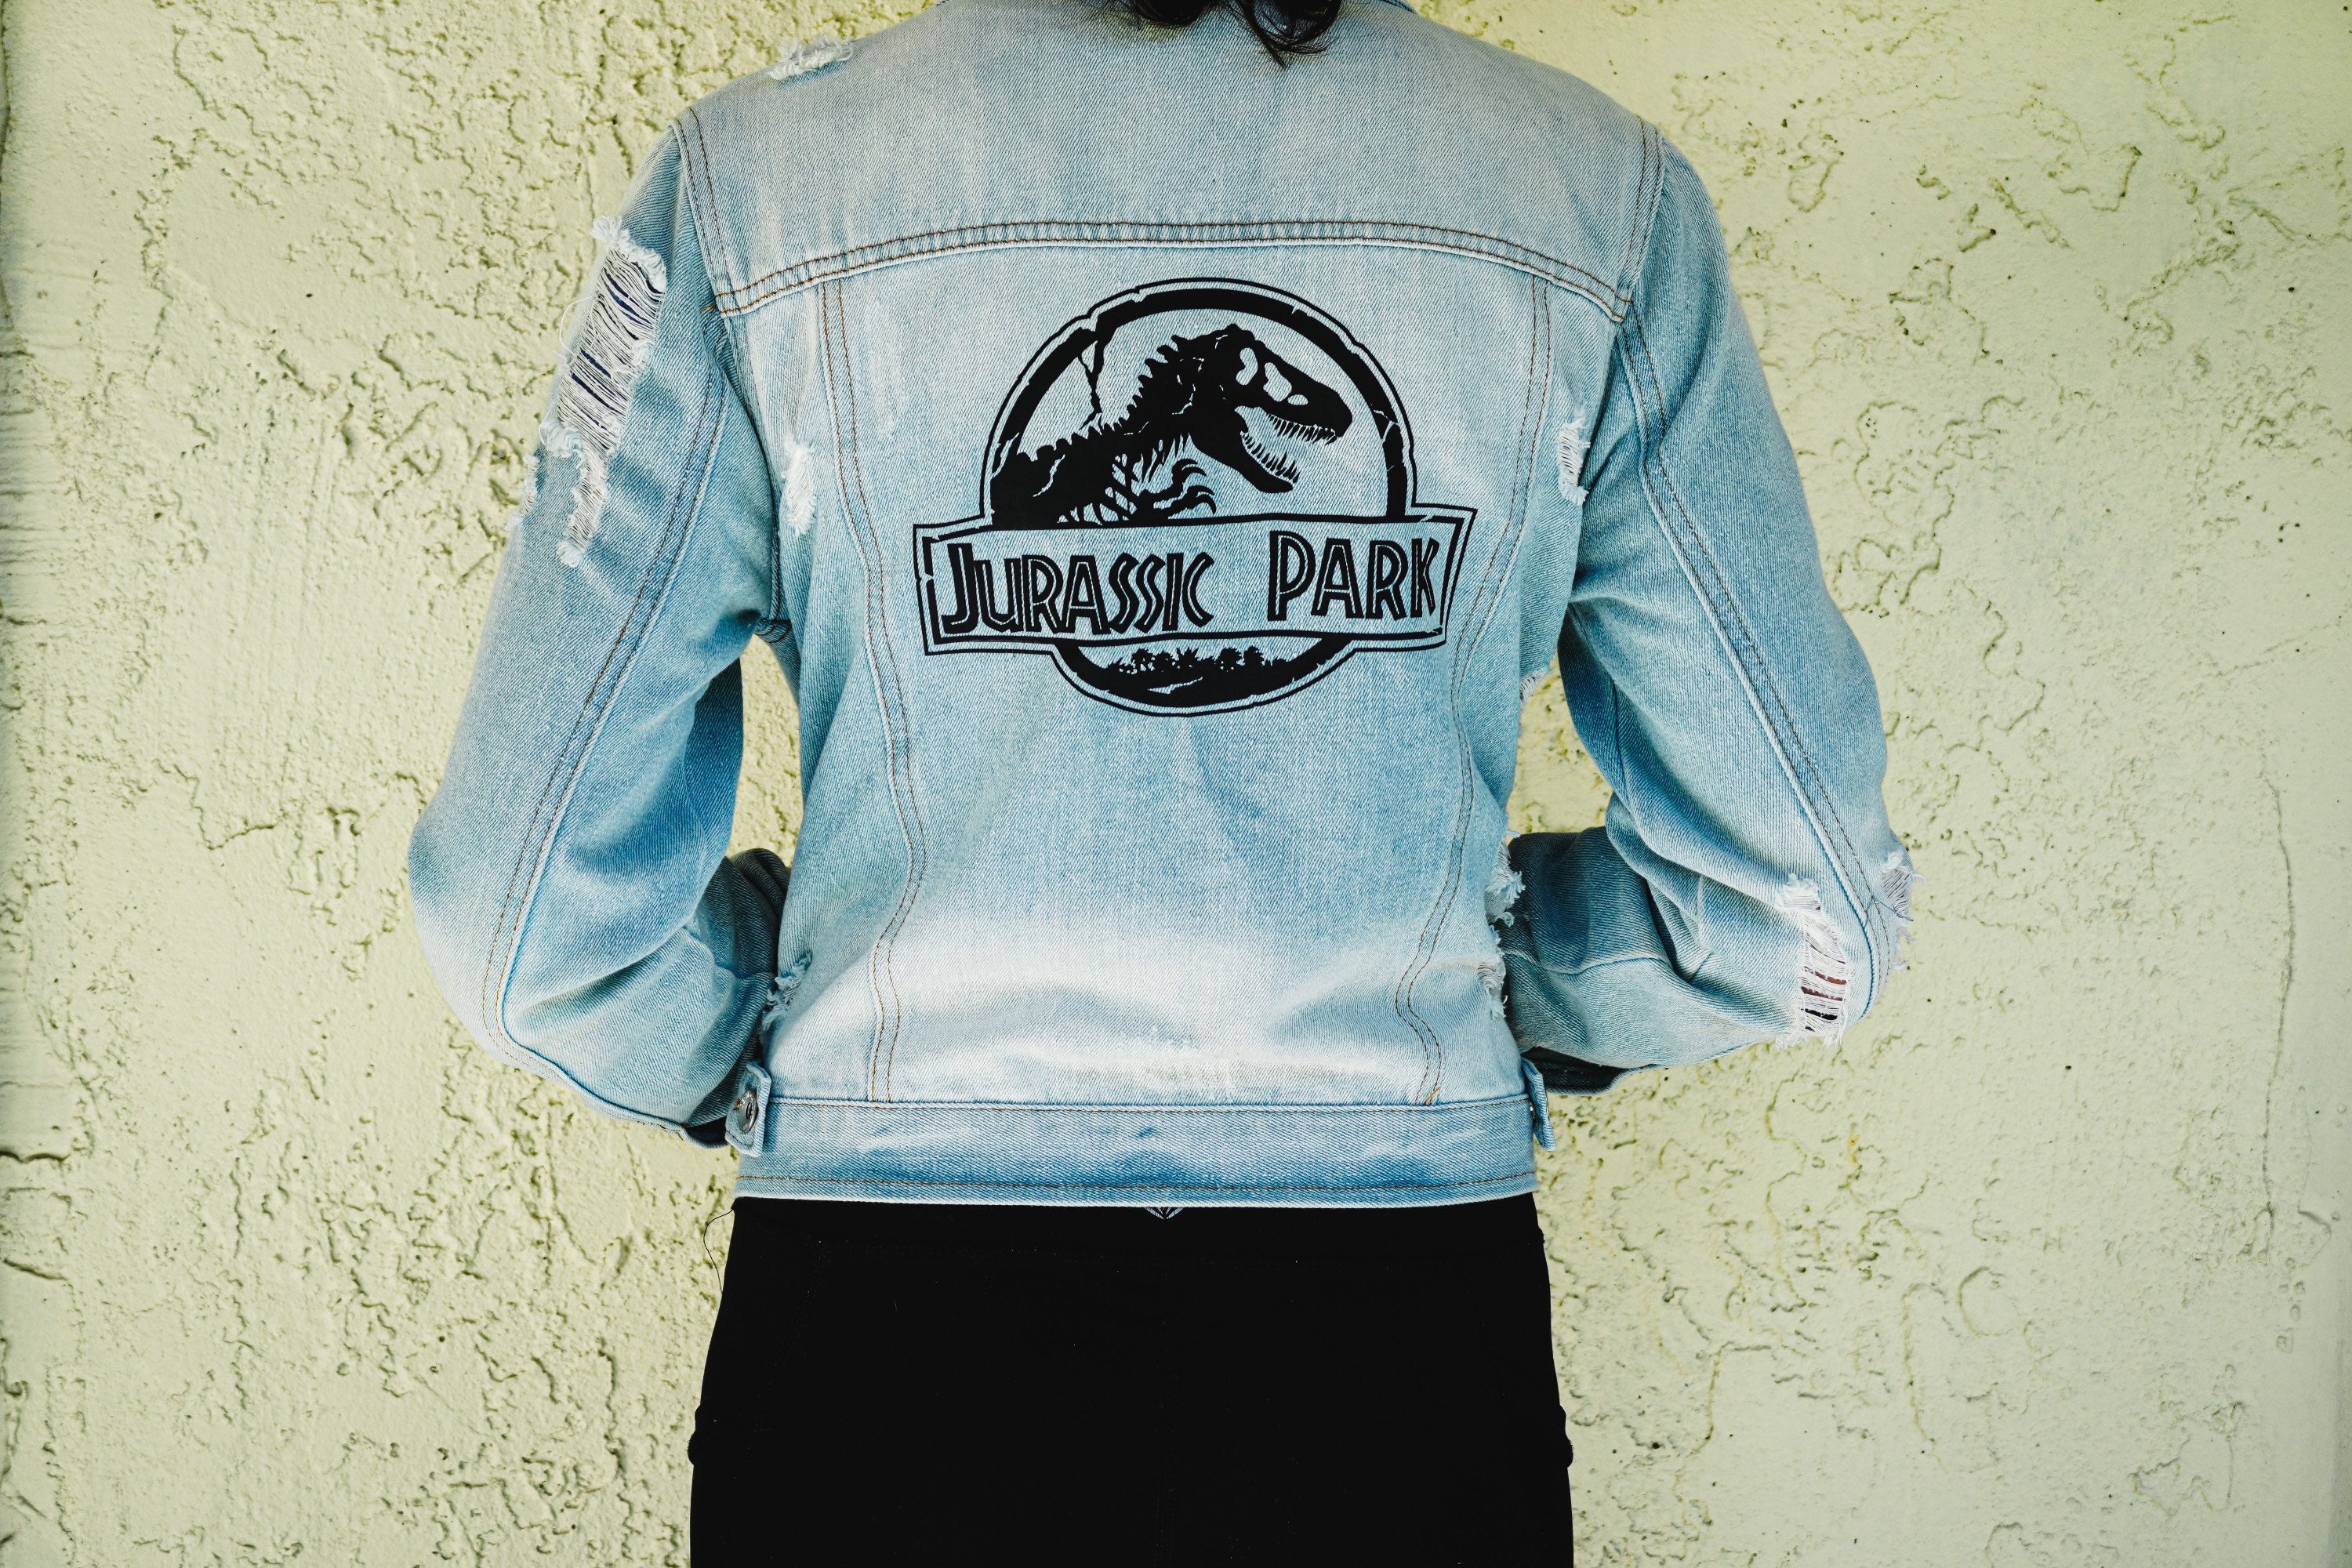 Hand Painted and Embroidered Jurassic Park Denim Jacket 